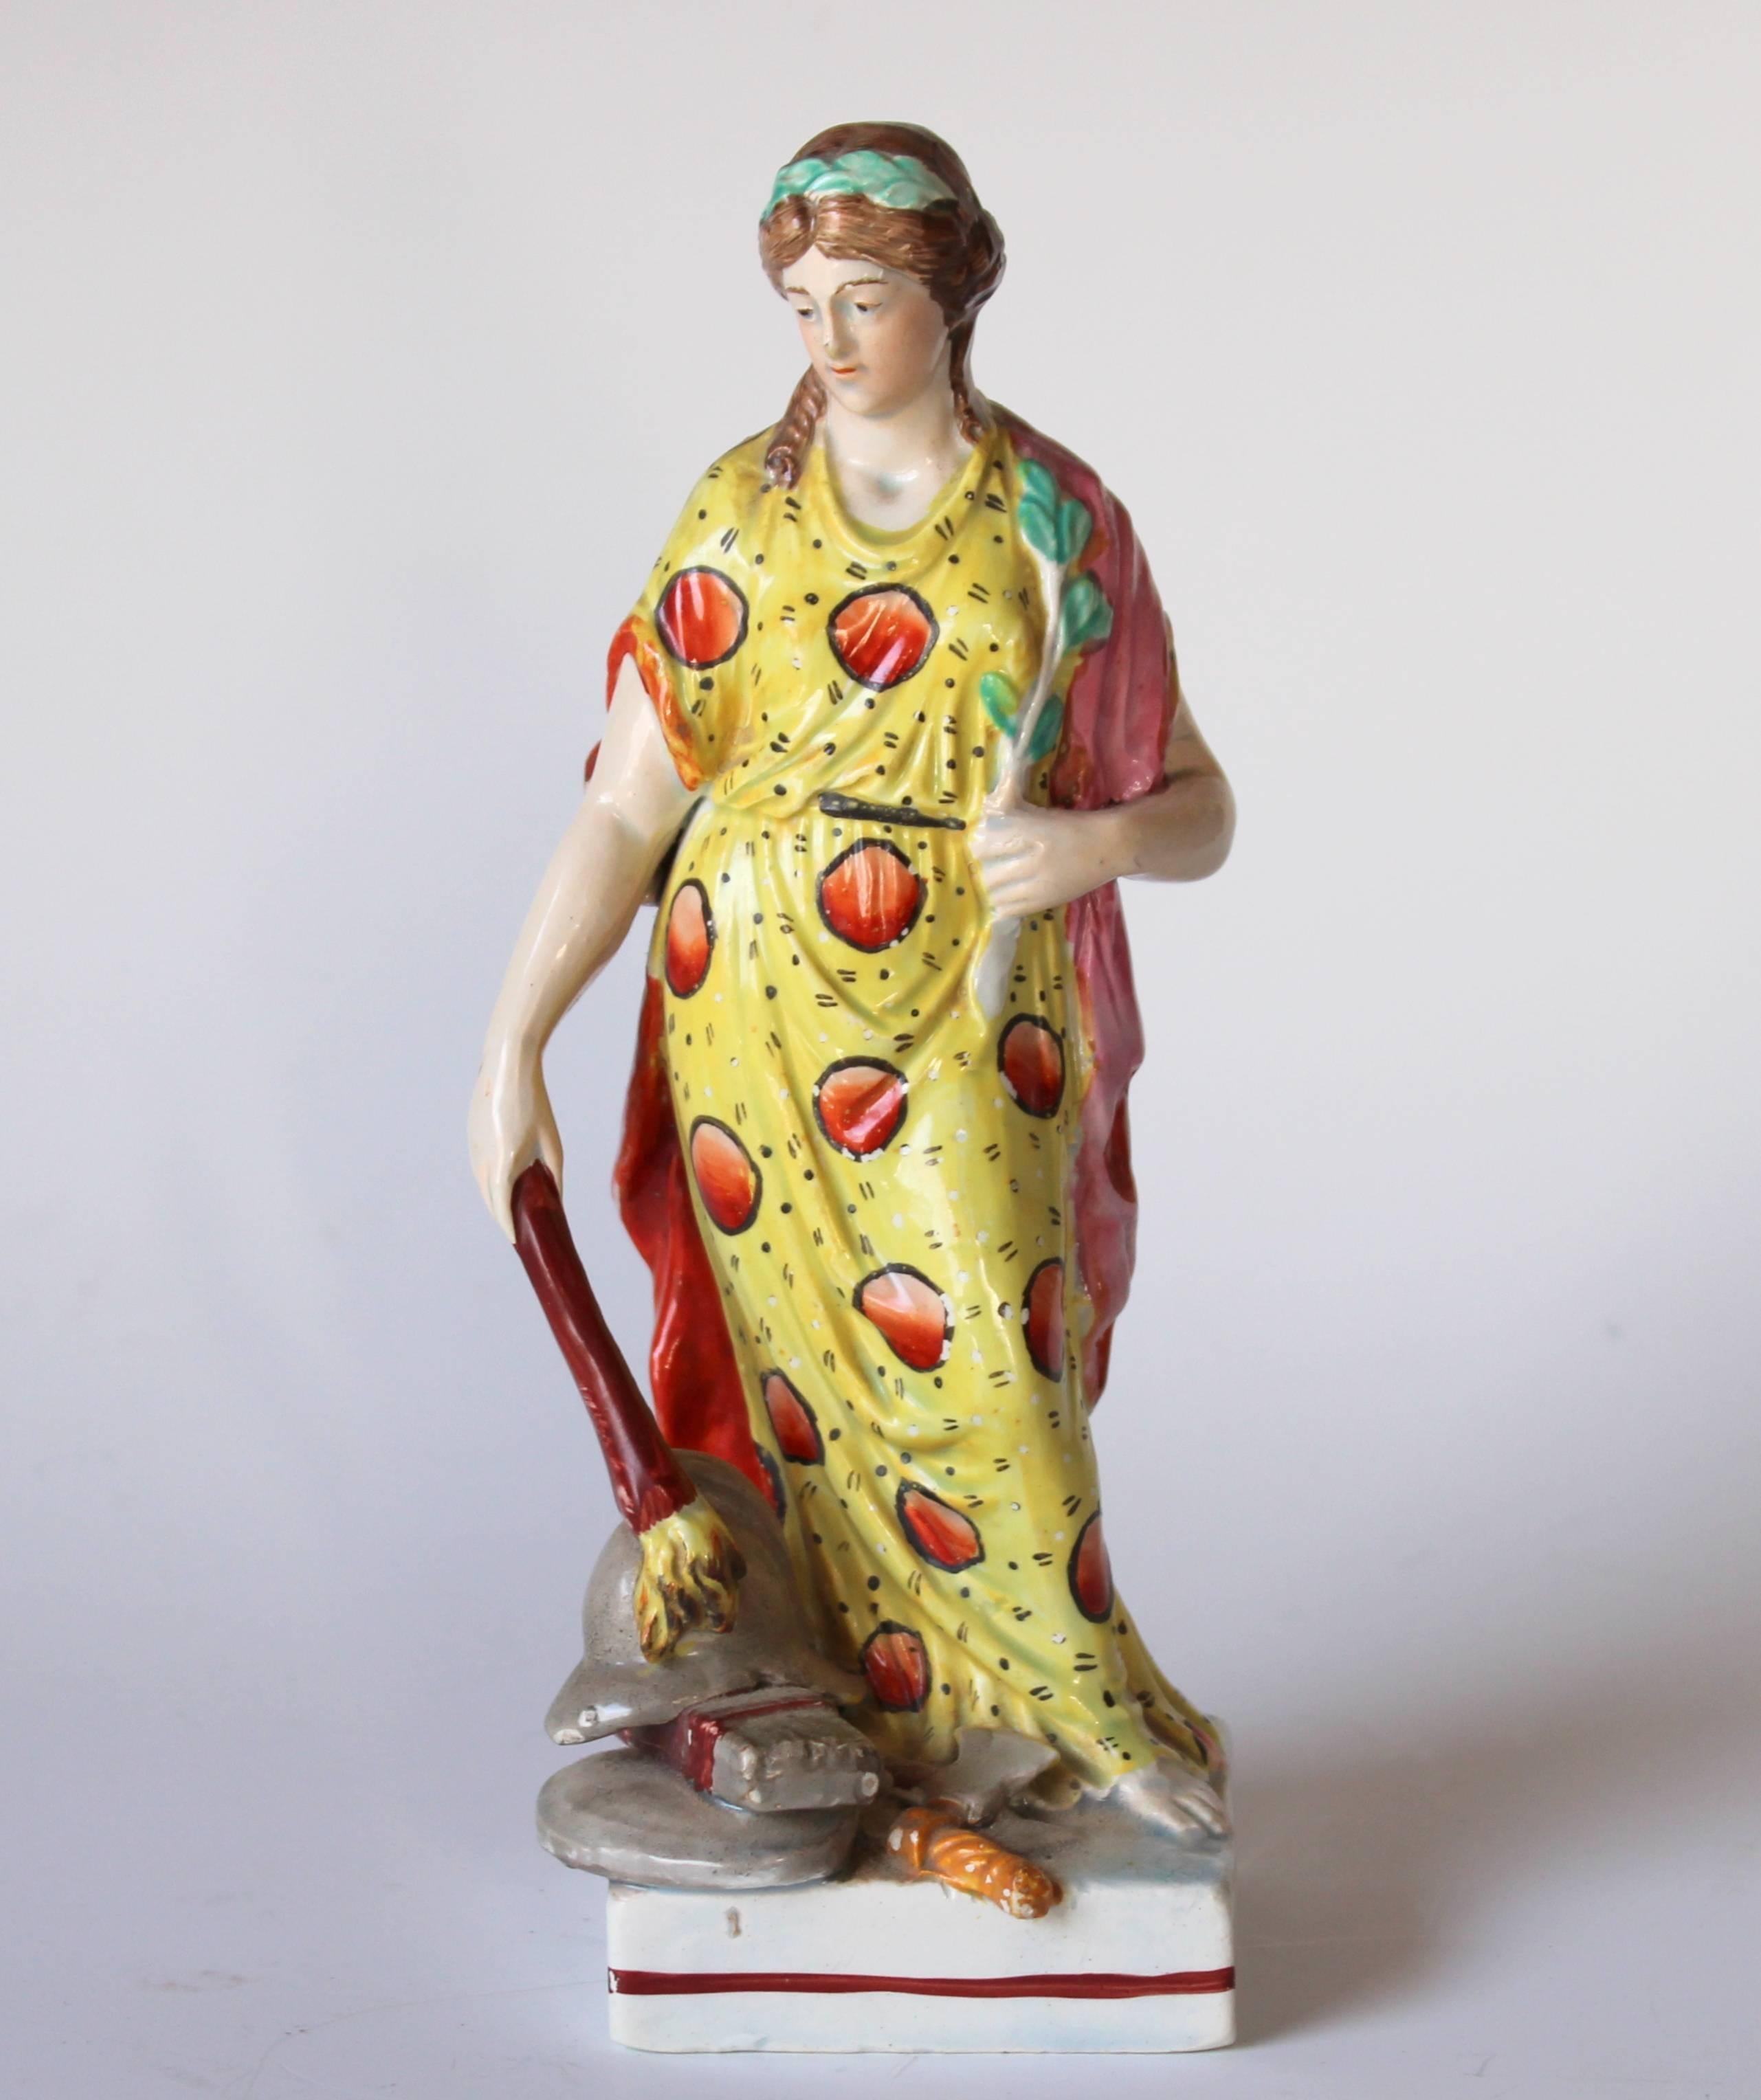 Antique English press molded pearlware figure of Victory, circa 1800. 8 1/8